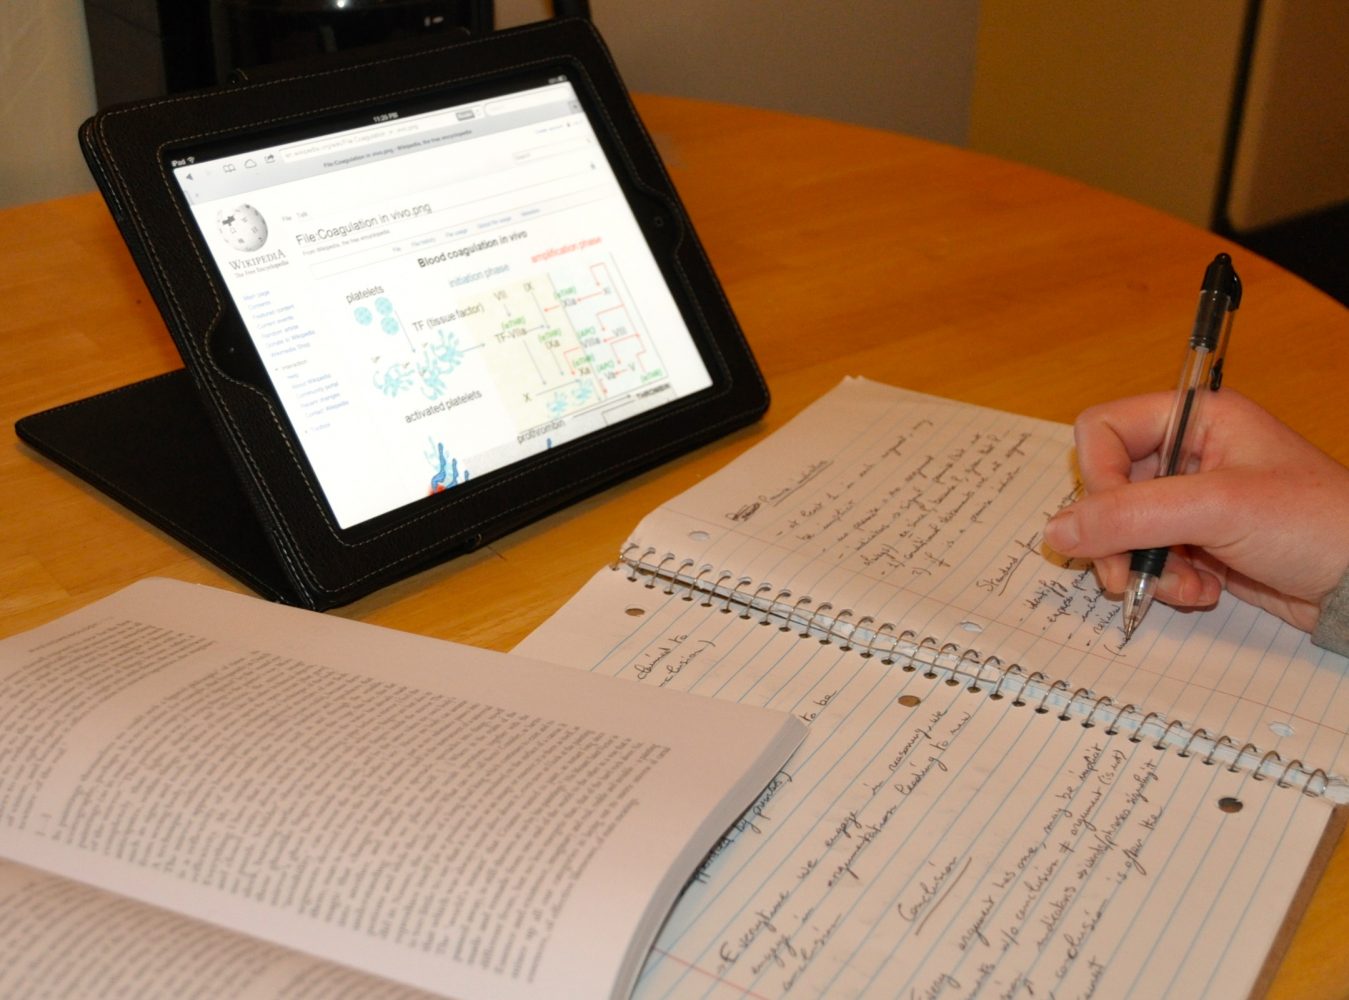 A student used an iPad to reference a website while studying.
Bartholome Rondet/Winonan